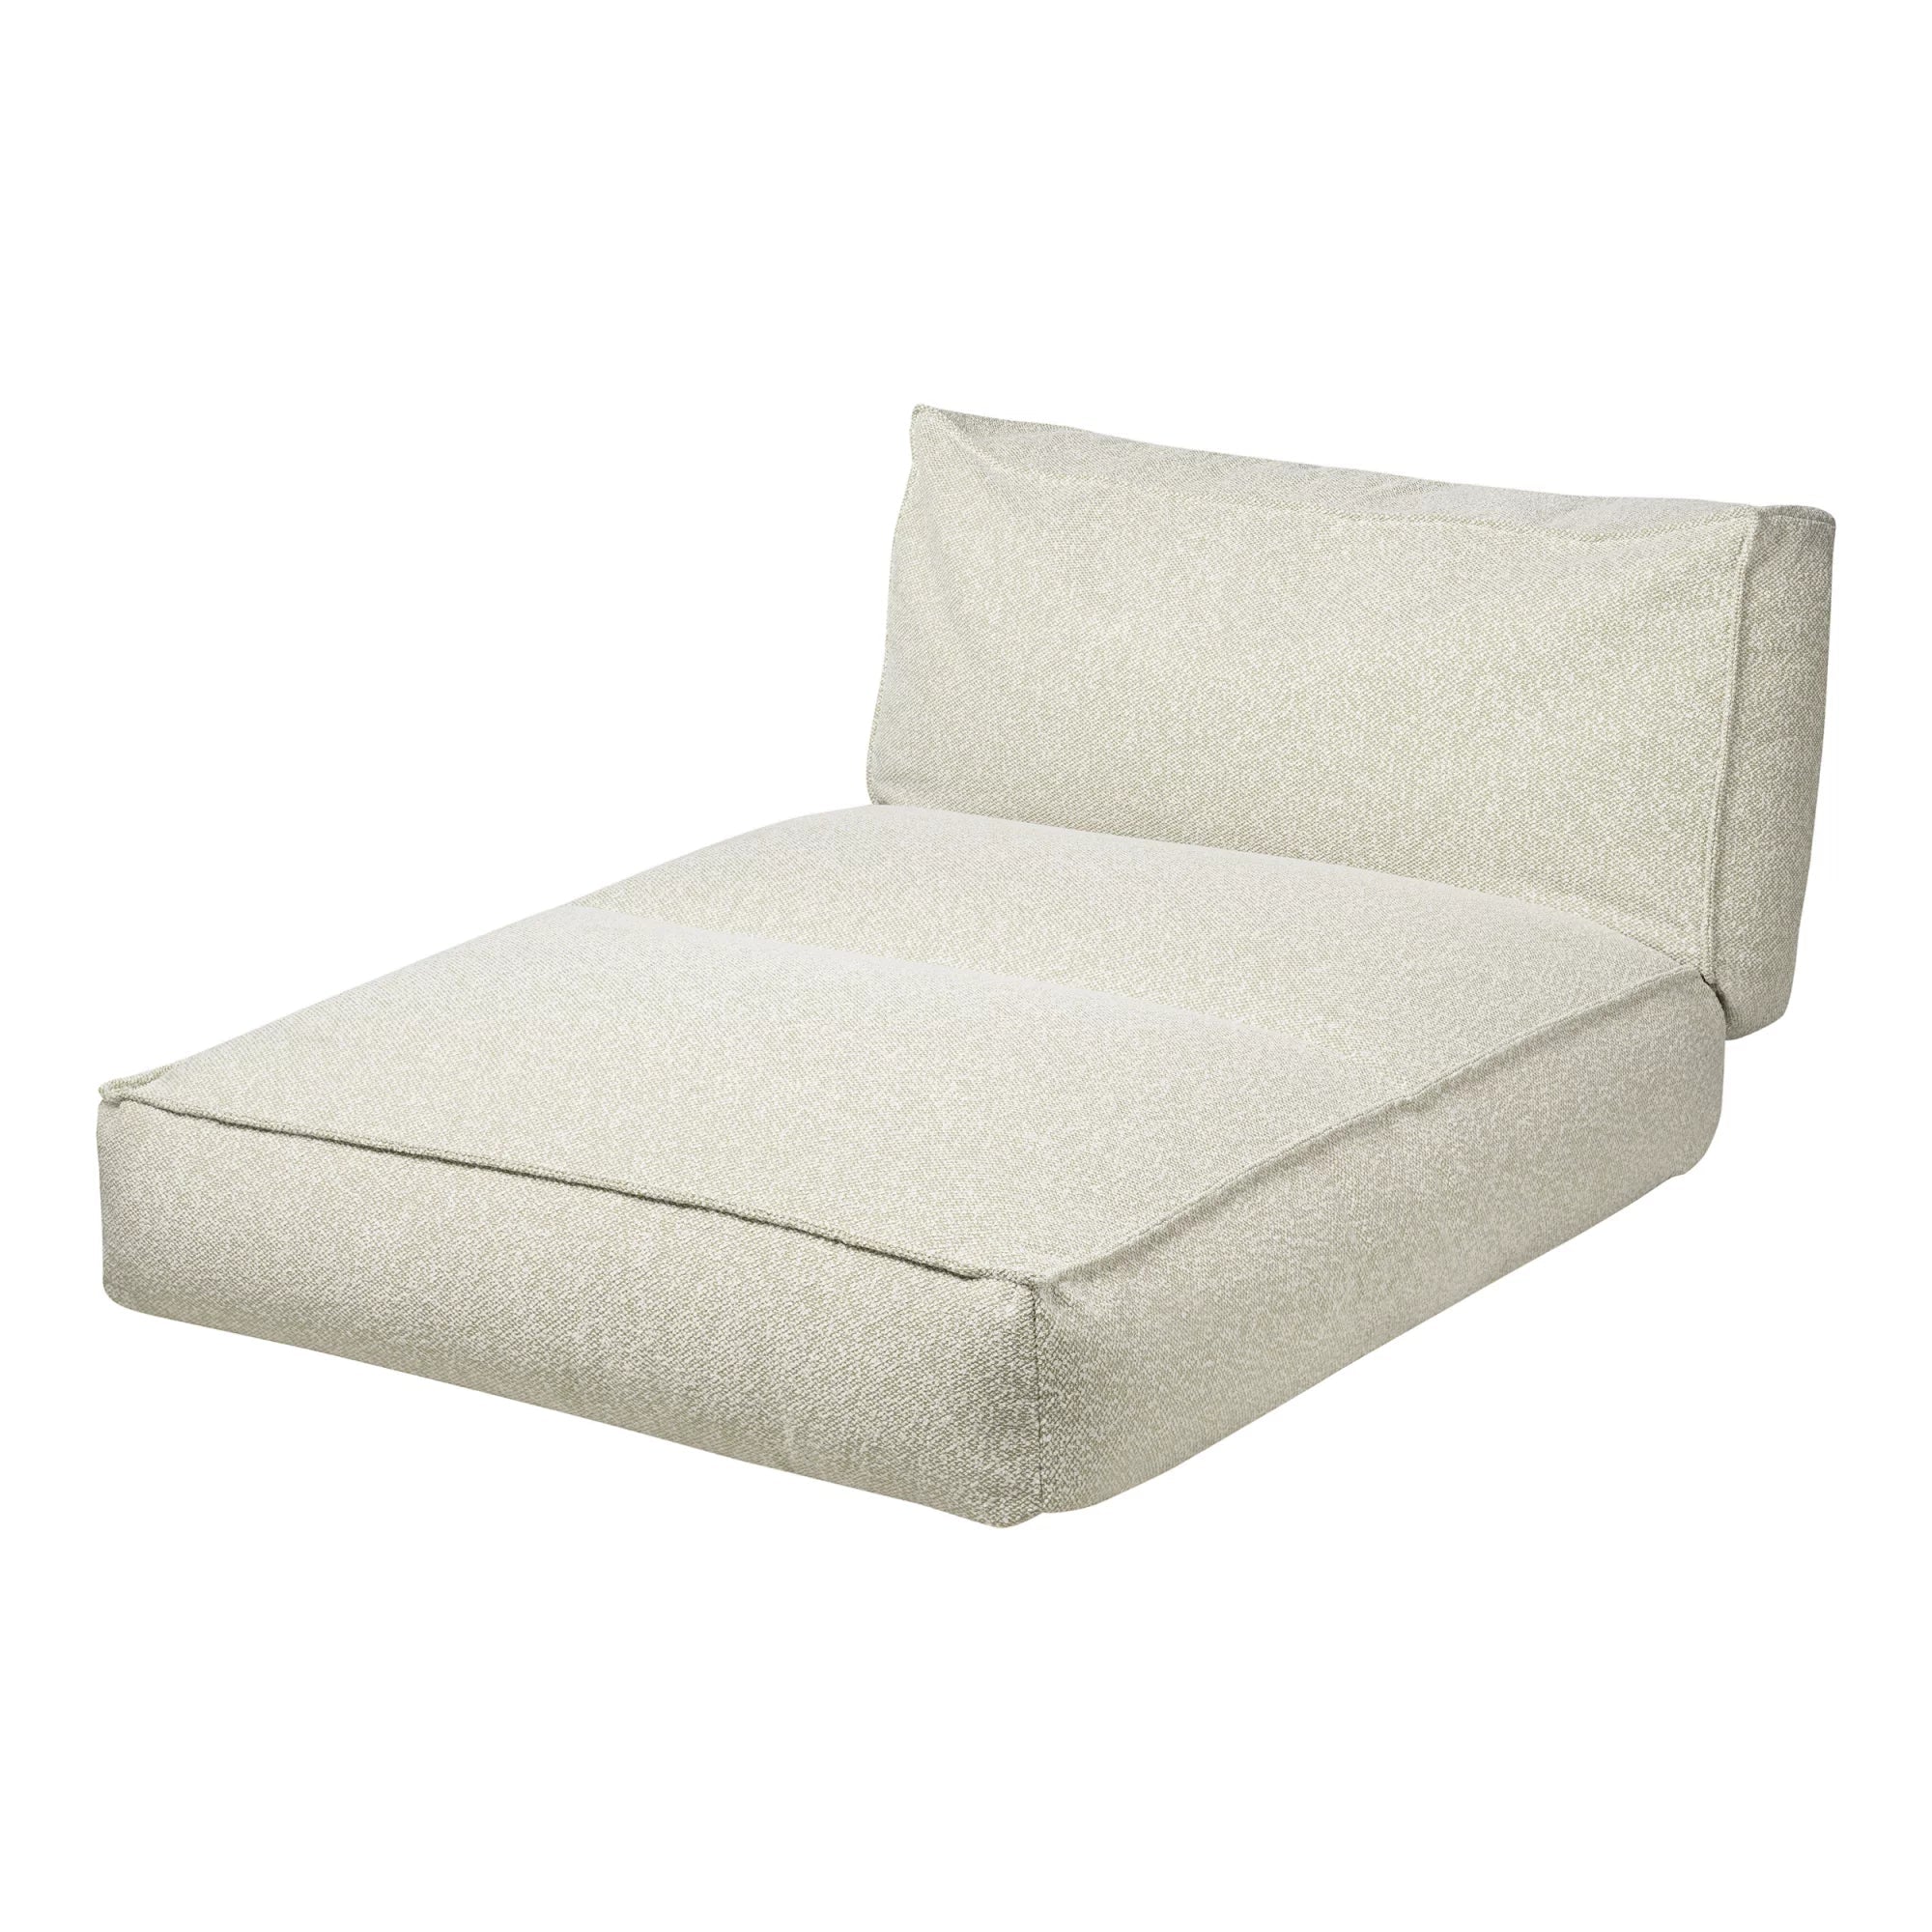 Blomus Stay Daybed iso Limited Edition Reah sand Blomus